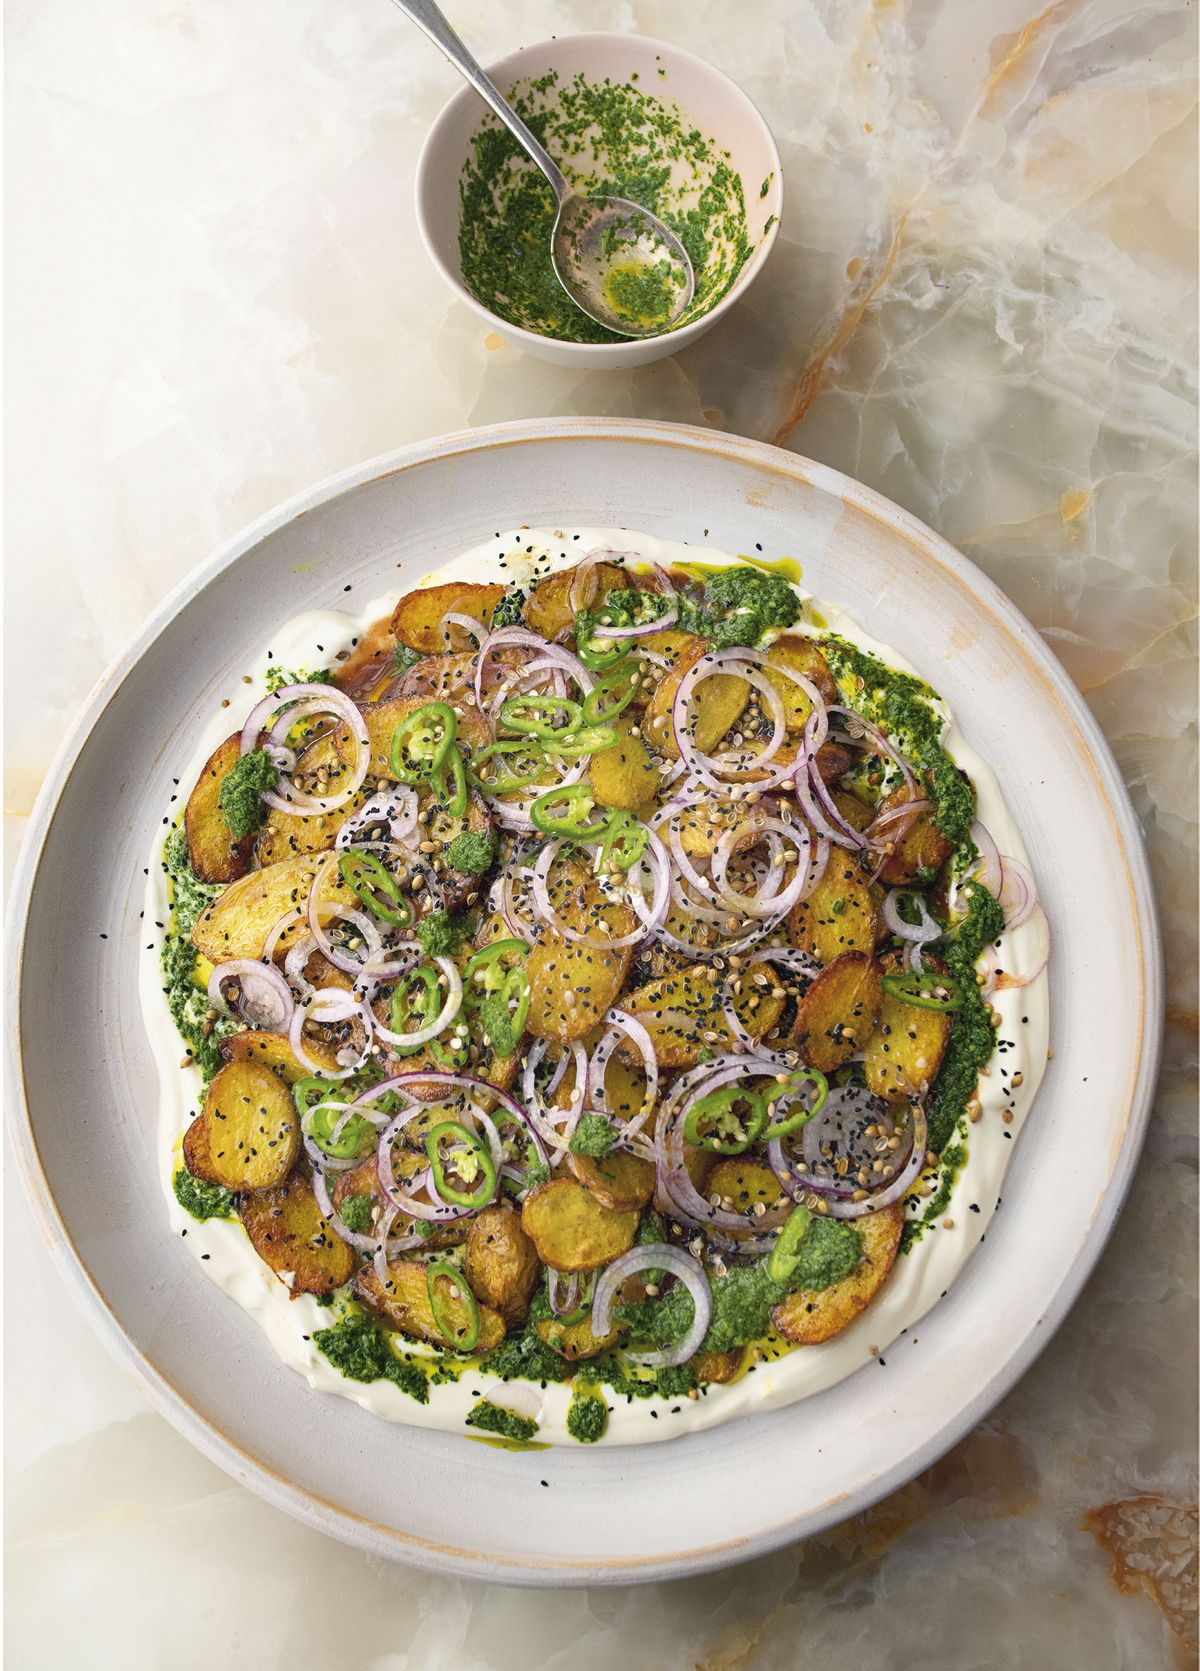 Yotam Ottolenghi’s Chaat Masala Potatoes with Yoghurt and Tamarind